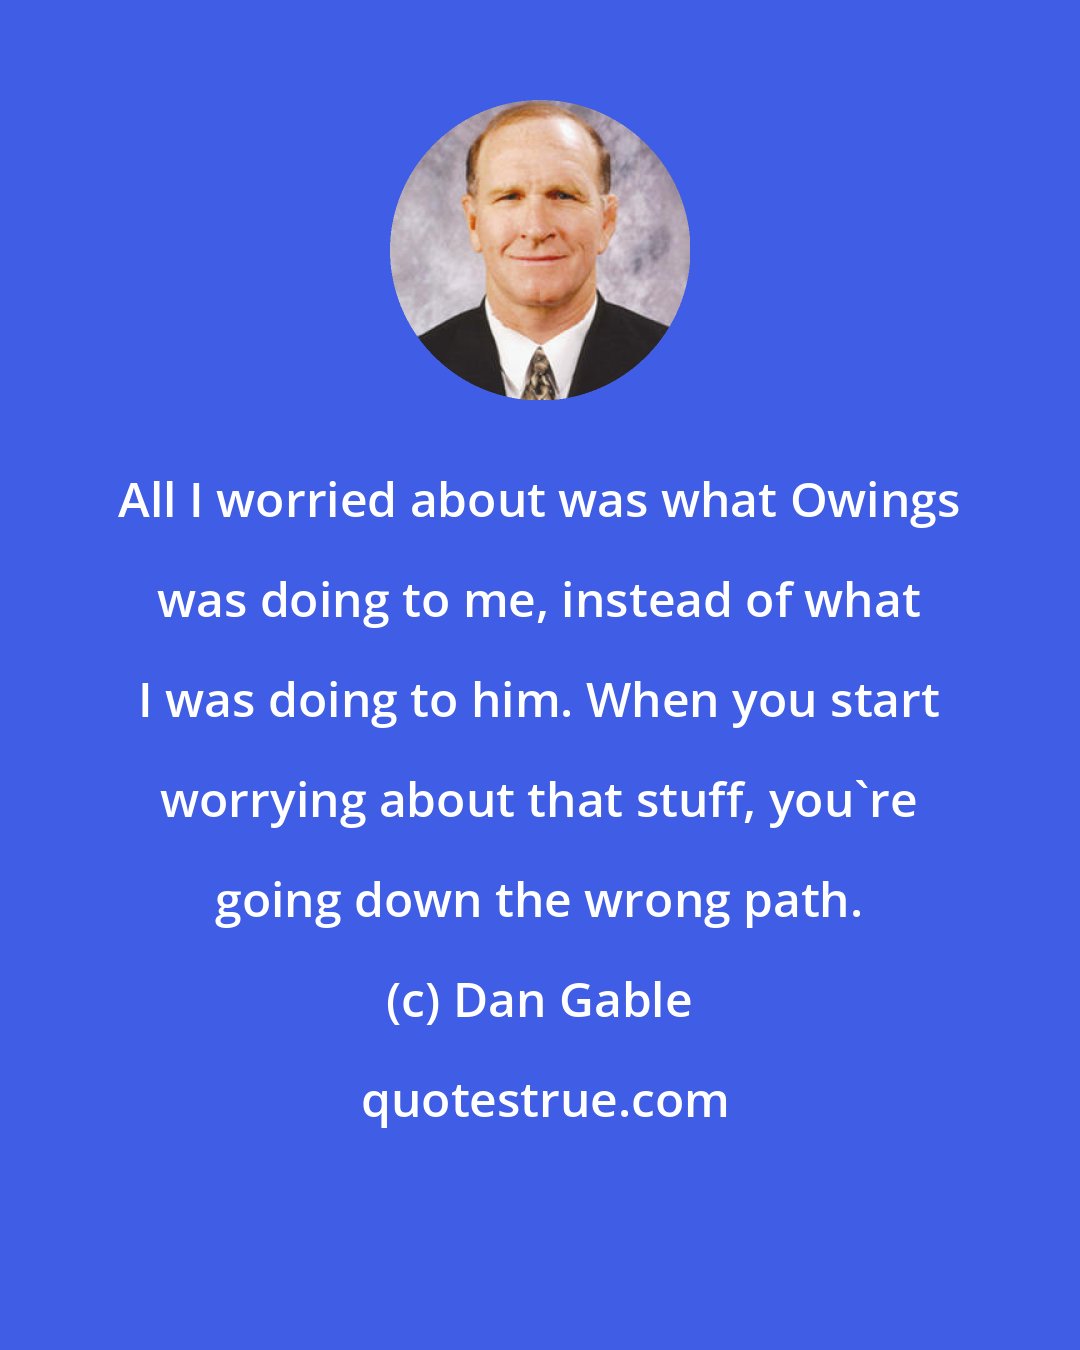 Dan Gable: All I worried about was what Owings was doing to me, instead of what I was doing to him. When you start worrying about that stuff, you're going down the wrong path.